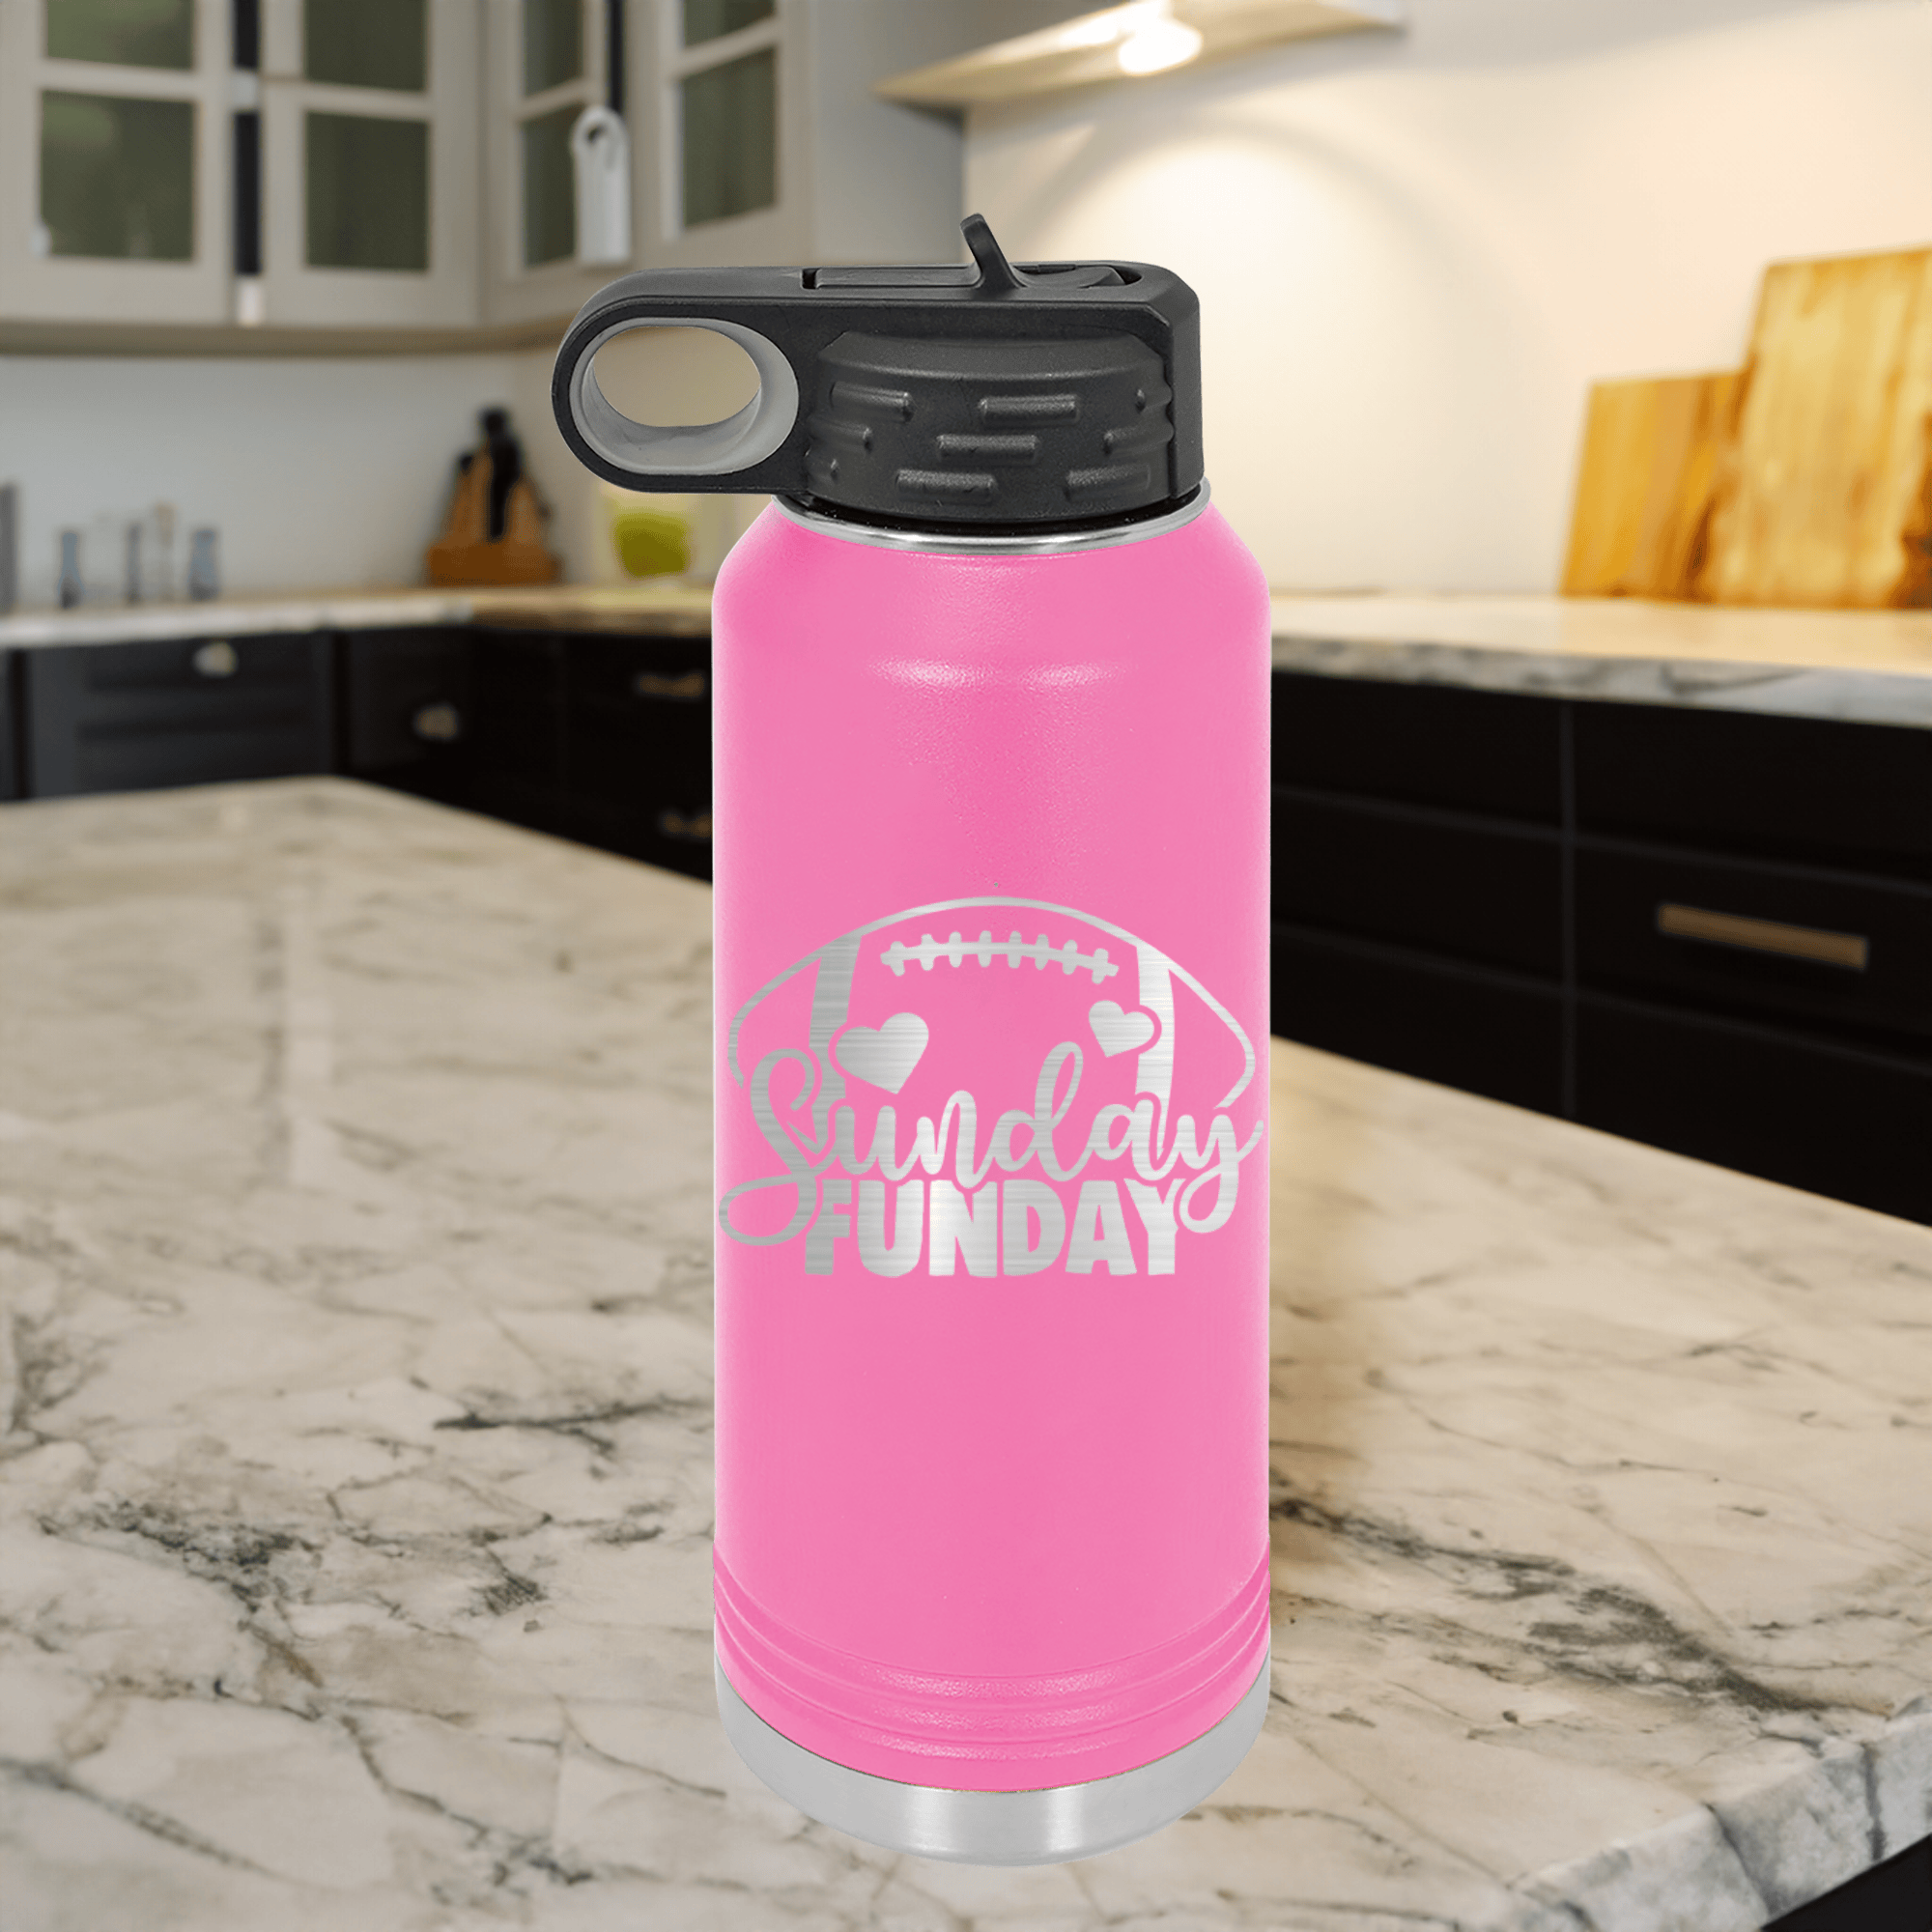 Funny A Day of Rest & Touchdowns 32 Oz Water Bottle 